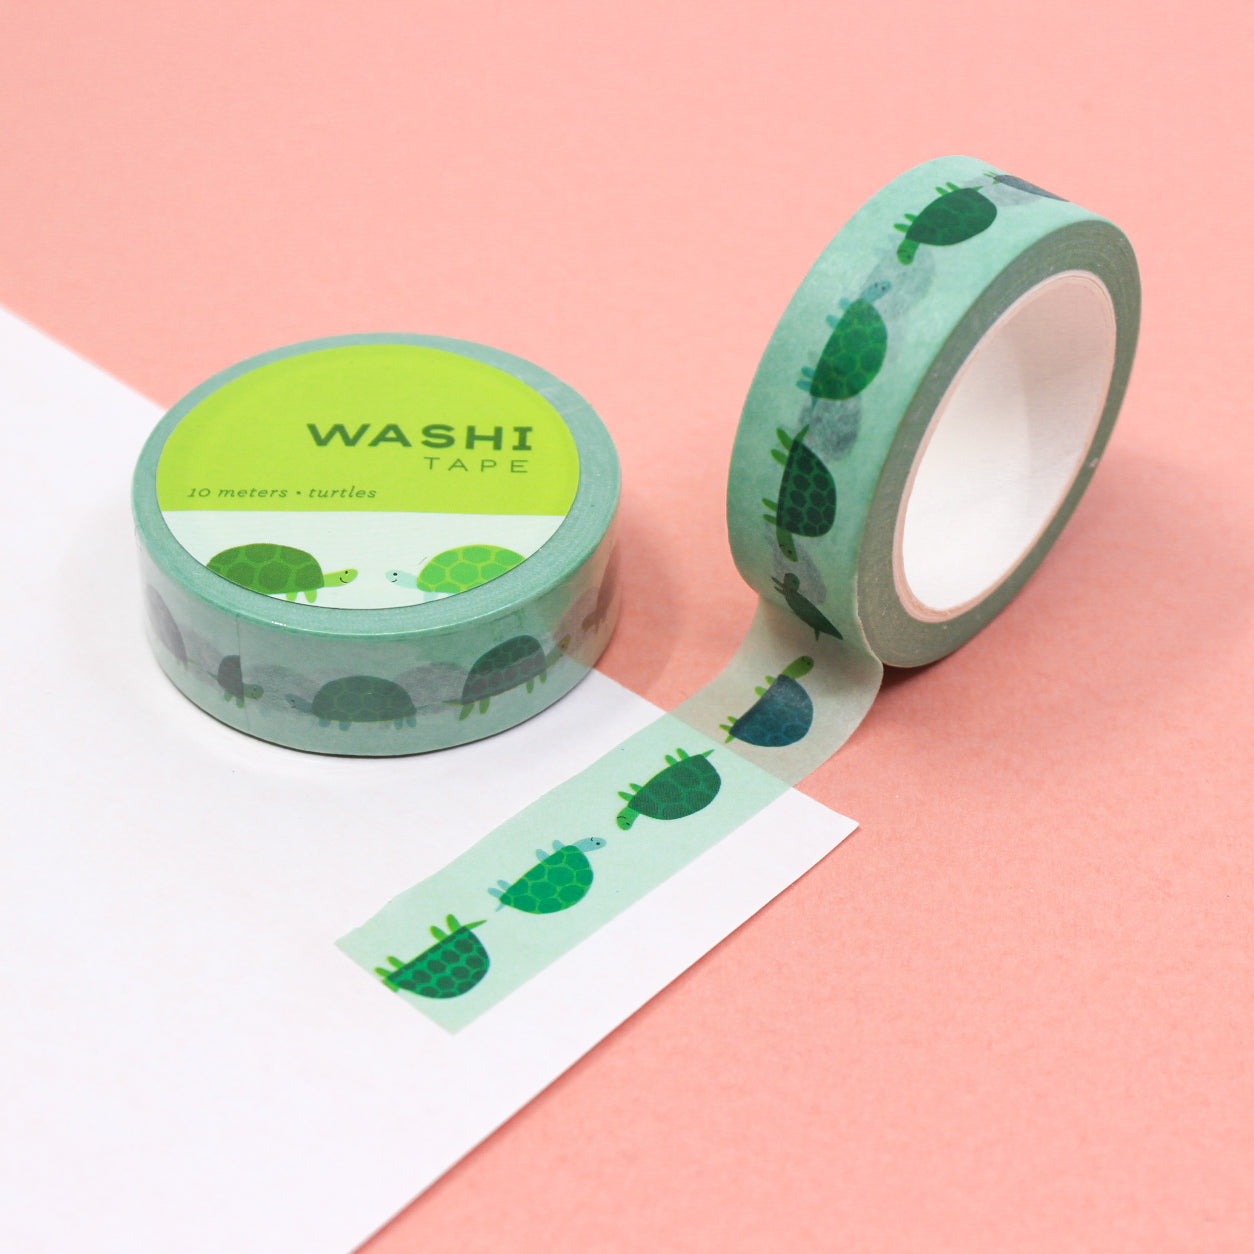 Dive into creativity with our Green Turtle Washi Tape, featuring delightful turtle illustrations in shades of green. Ideal for adding a charming and aquatic touch to your projects. This tape is sold at BBB Supplies Craft Shop.